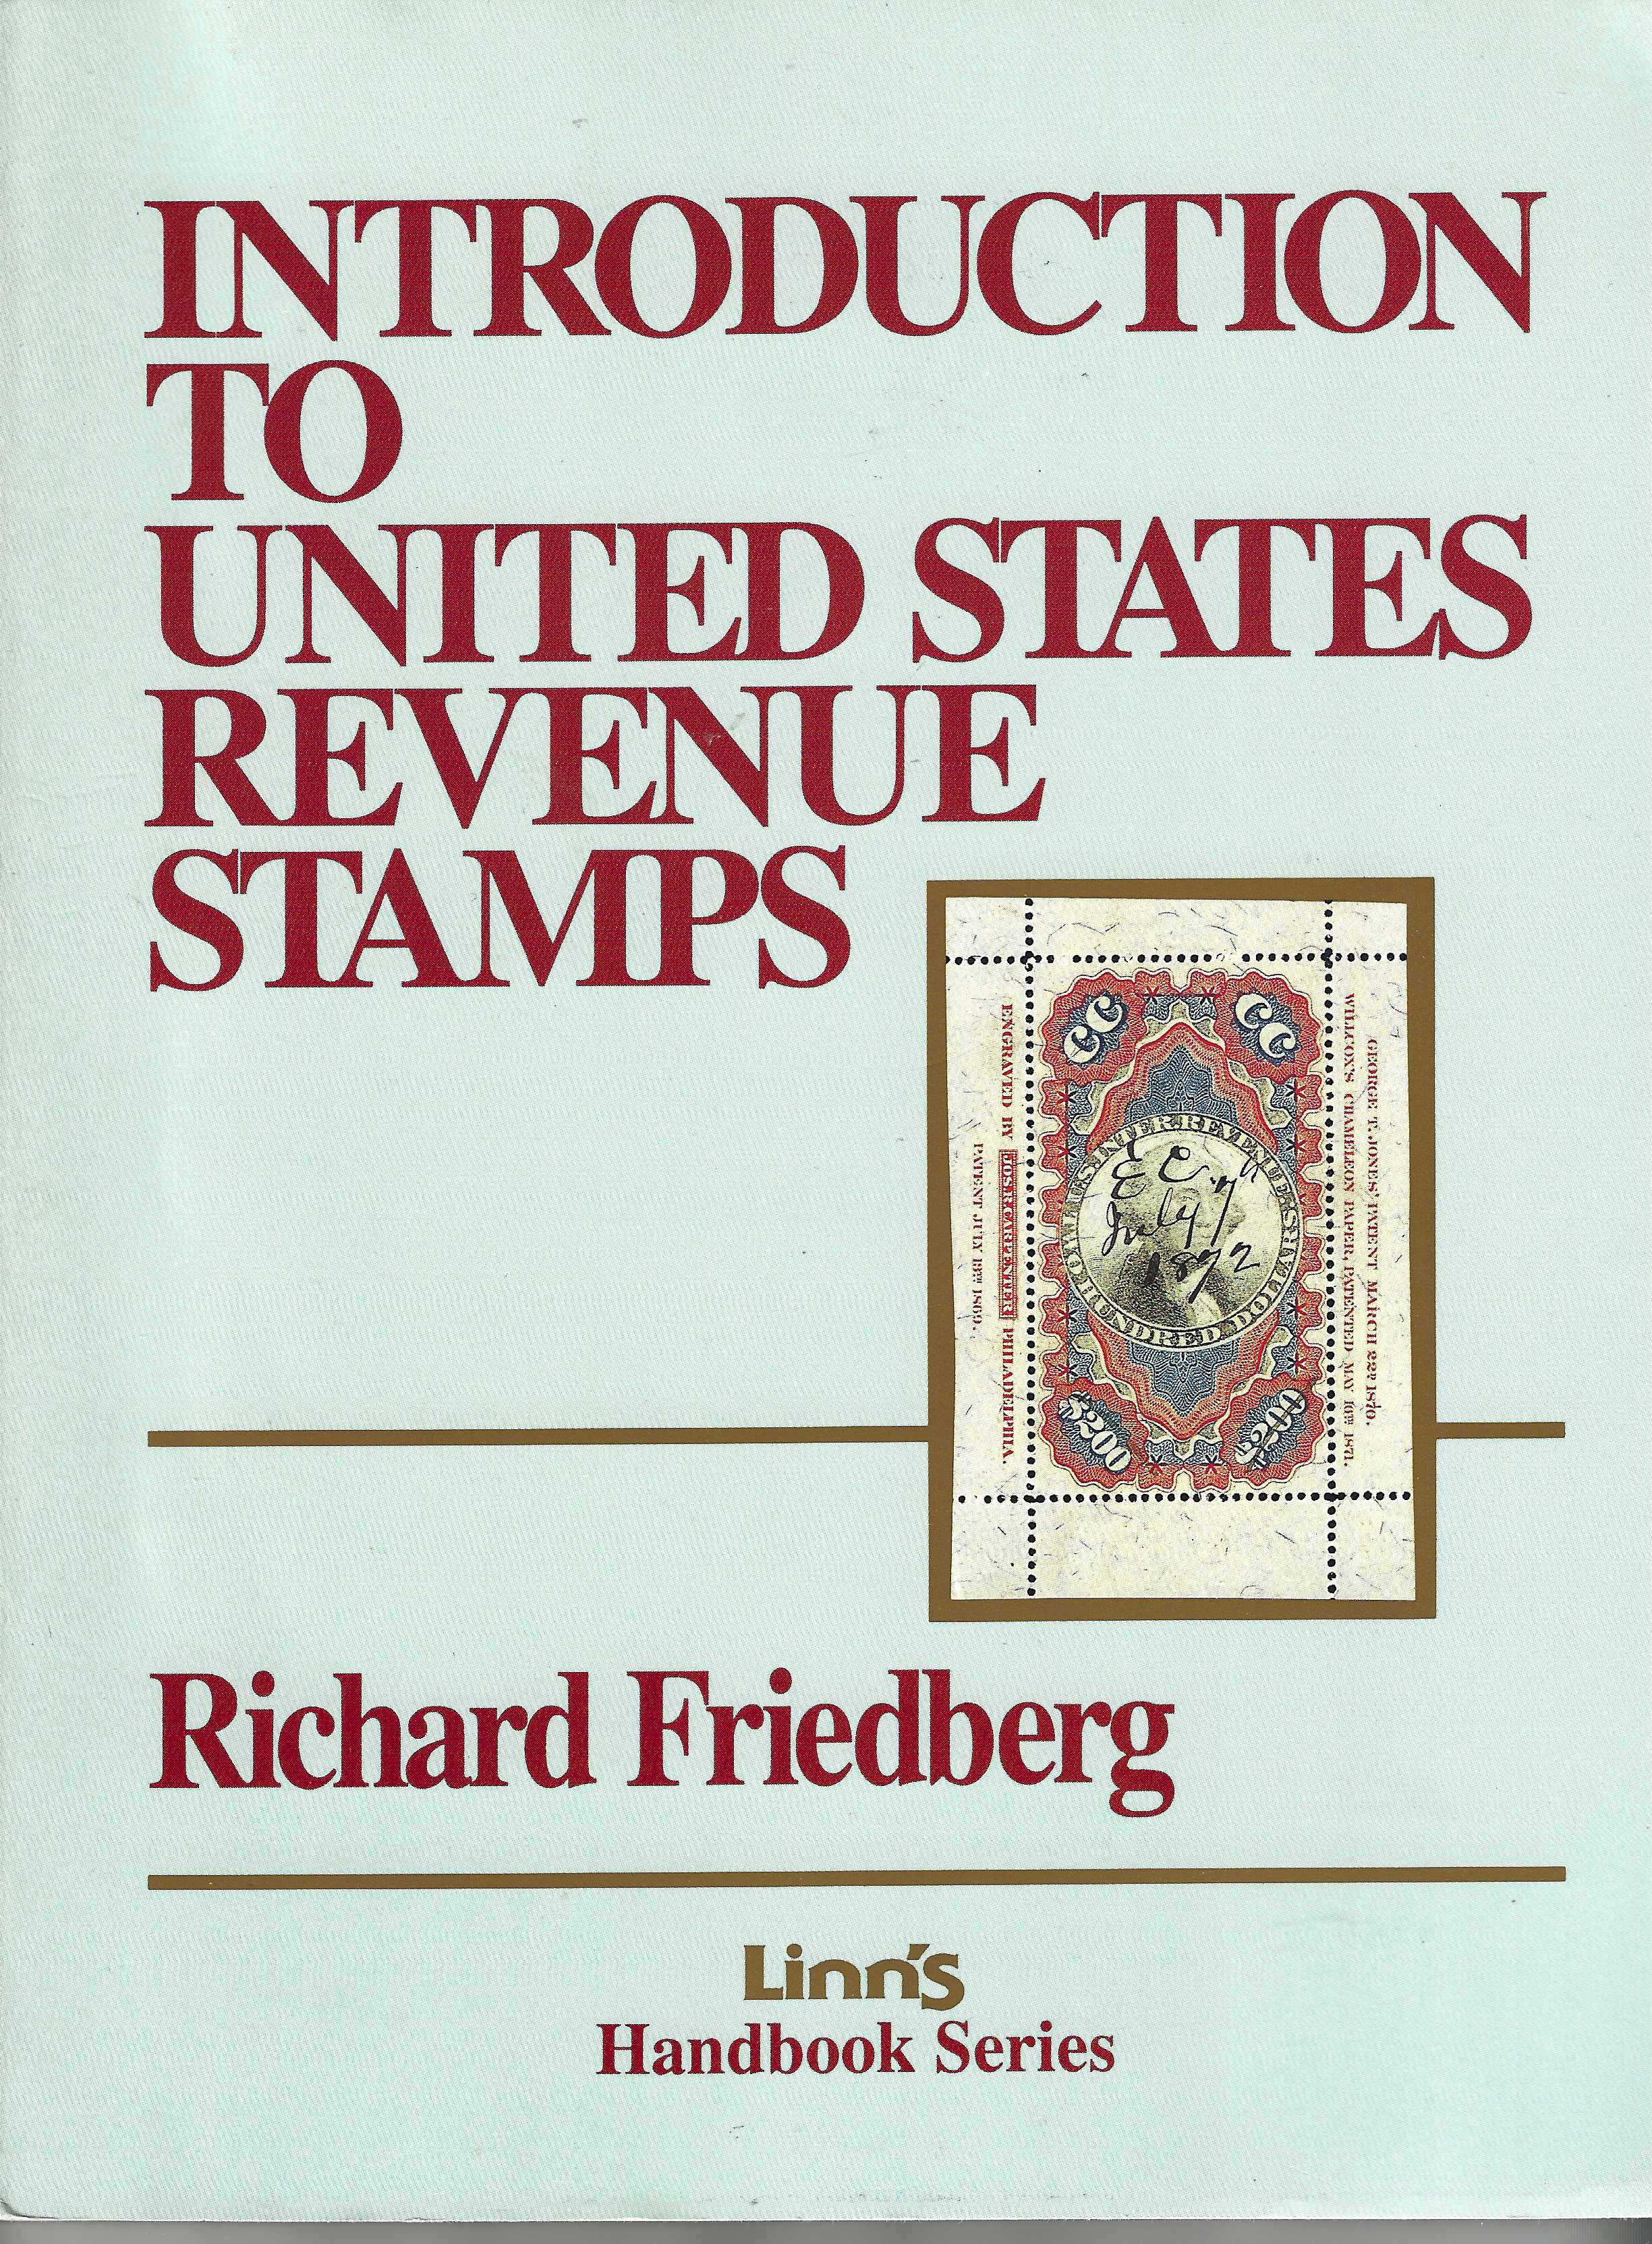 publication Introduction to United States Revenue Stamps by Richard Friedberg 1994